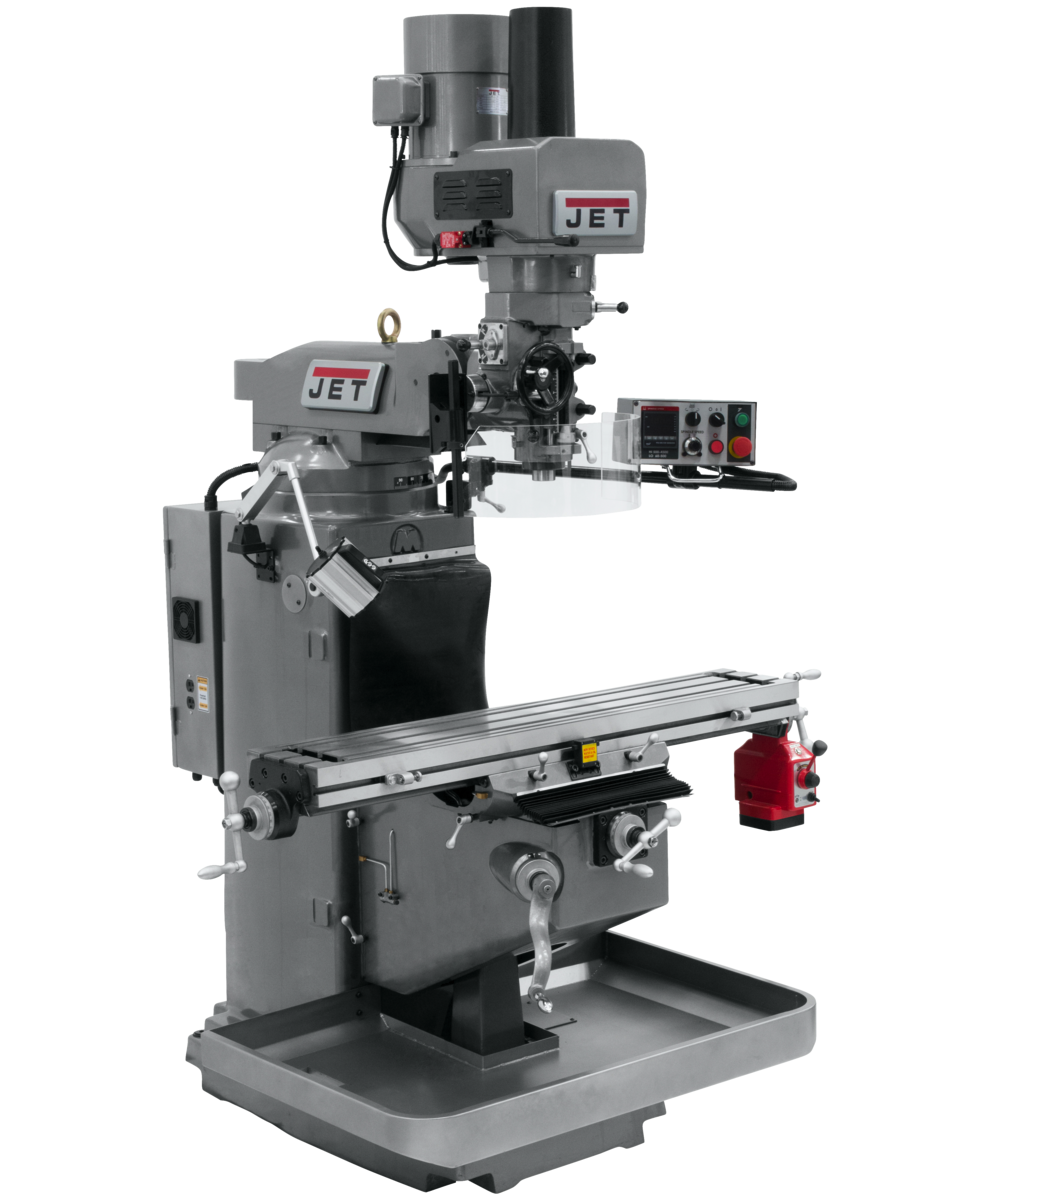 JTM-949EVS Mill With X-Axis Powerfeed and Air Powered Draw Bar